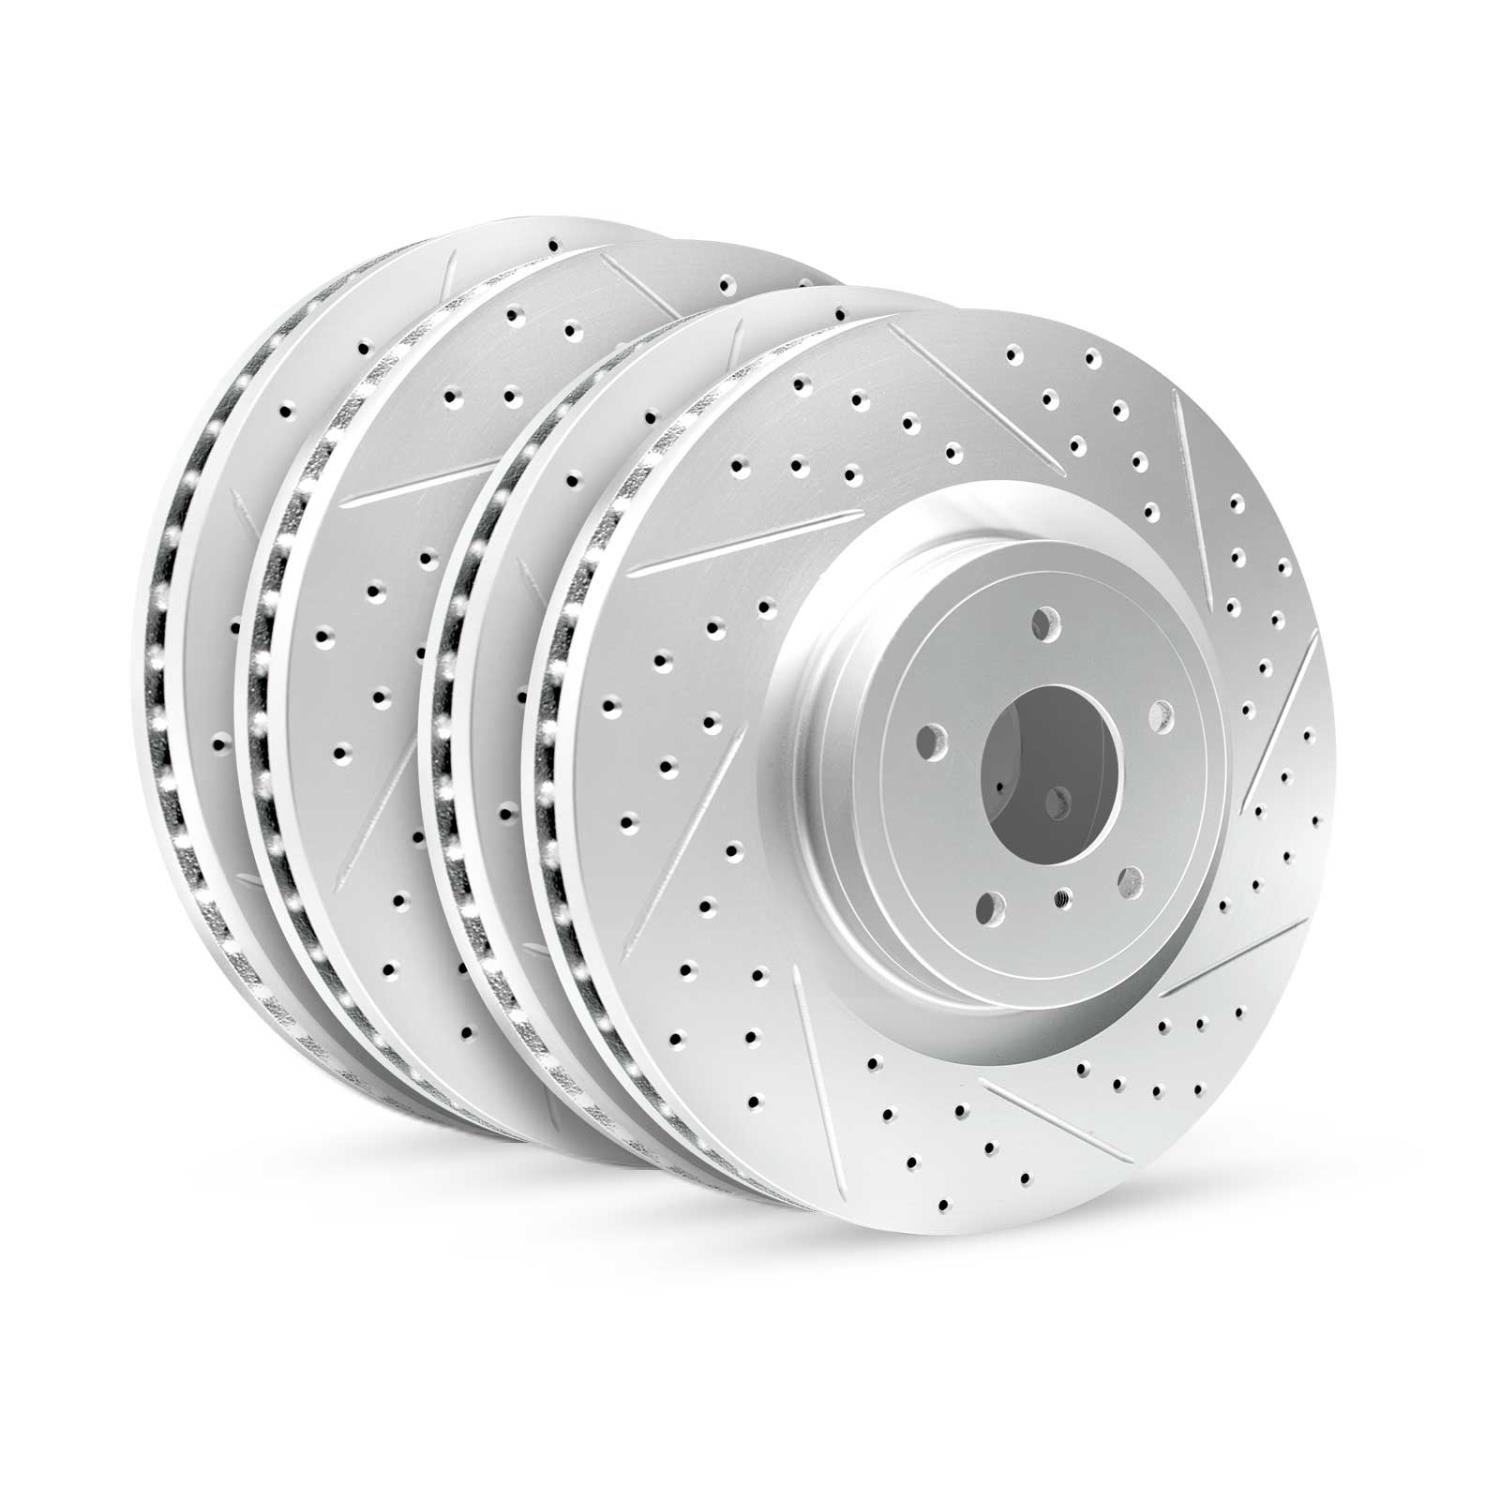 GEO-Carbon Drilled/Slotted Rotors, 2017-2019 Fits Multiple